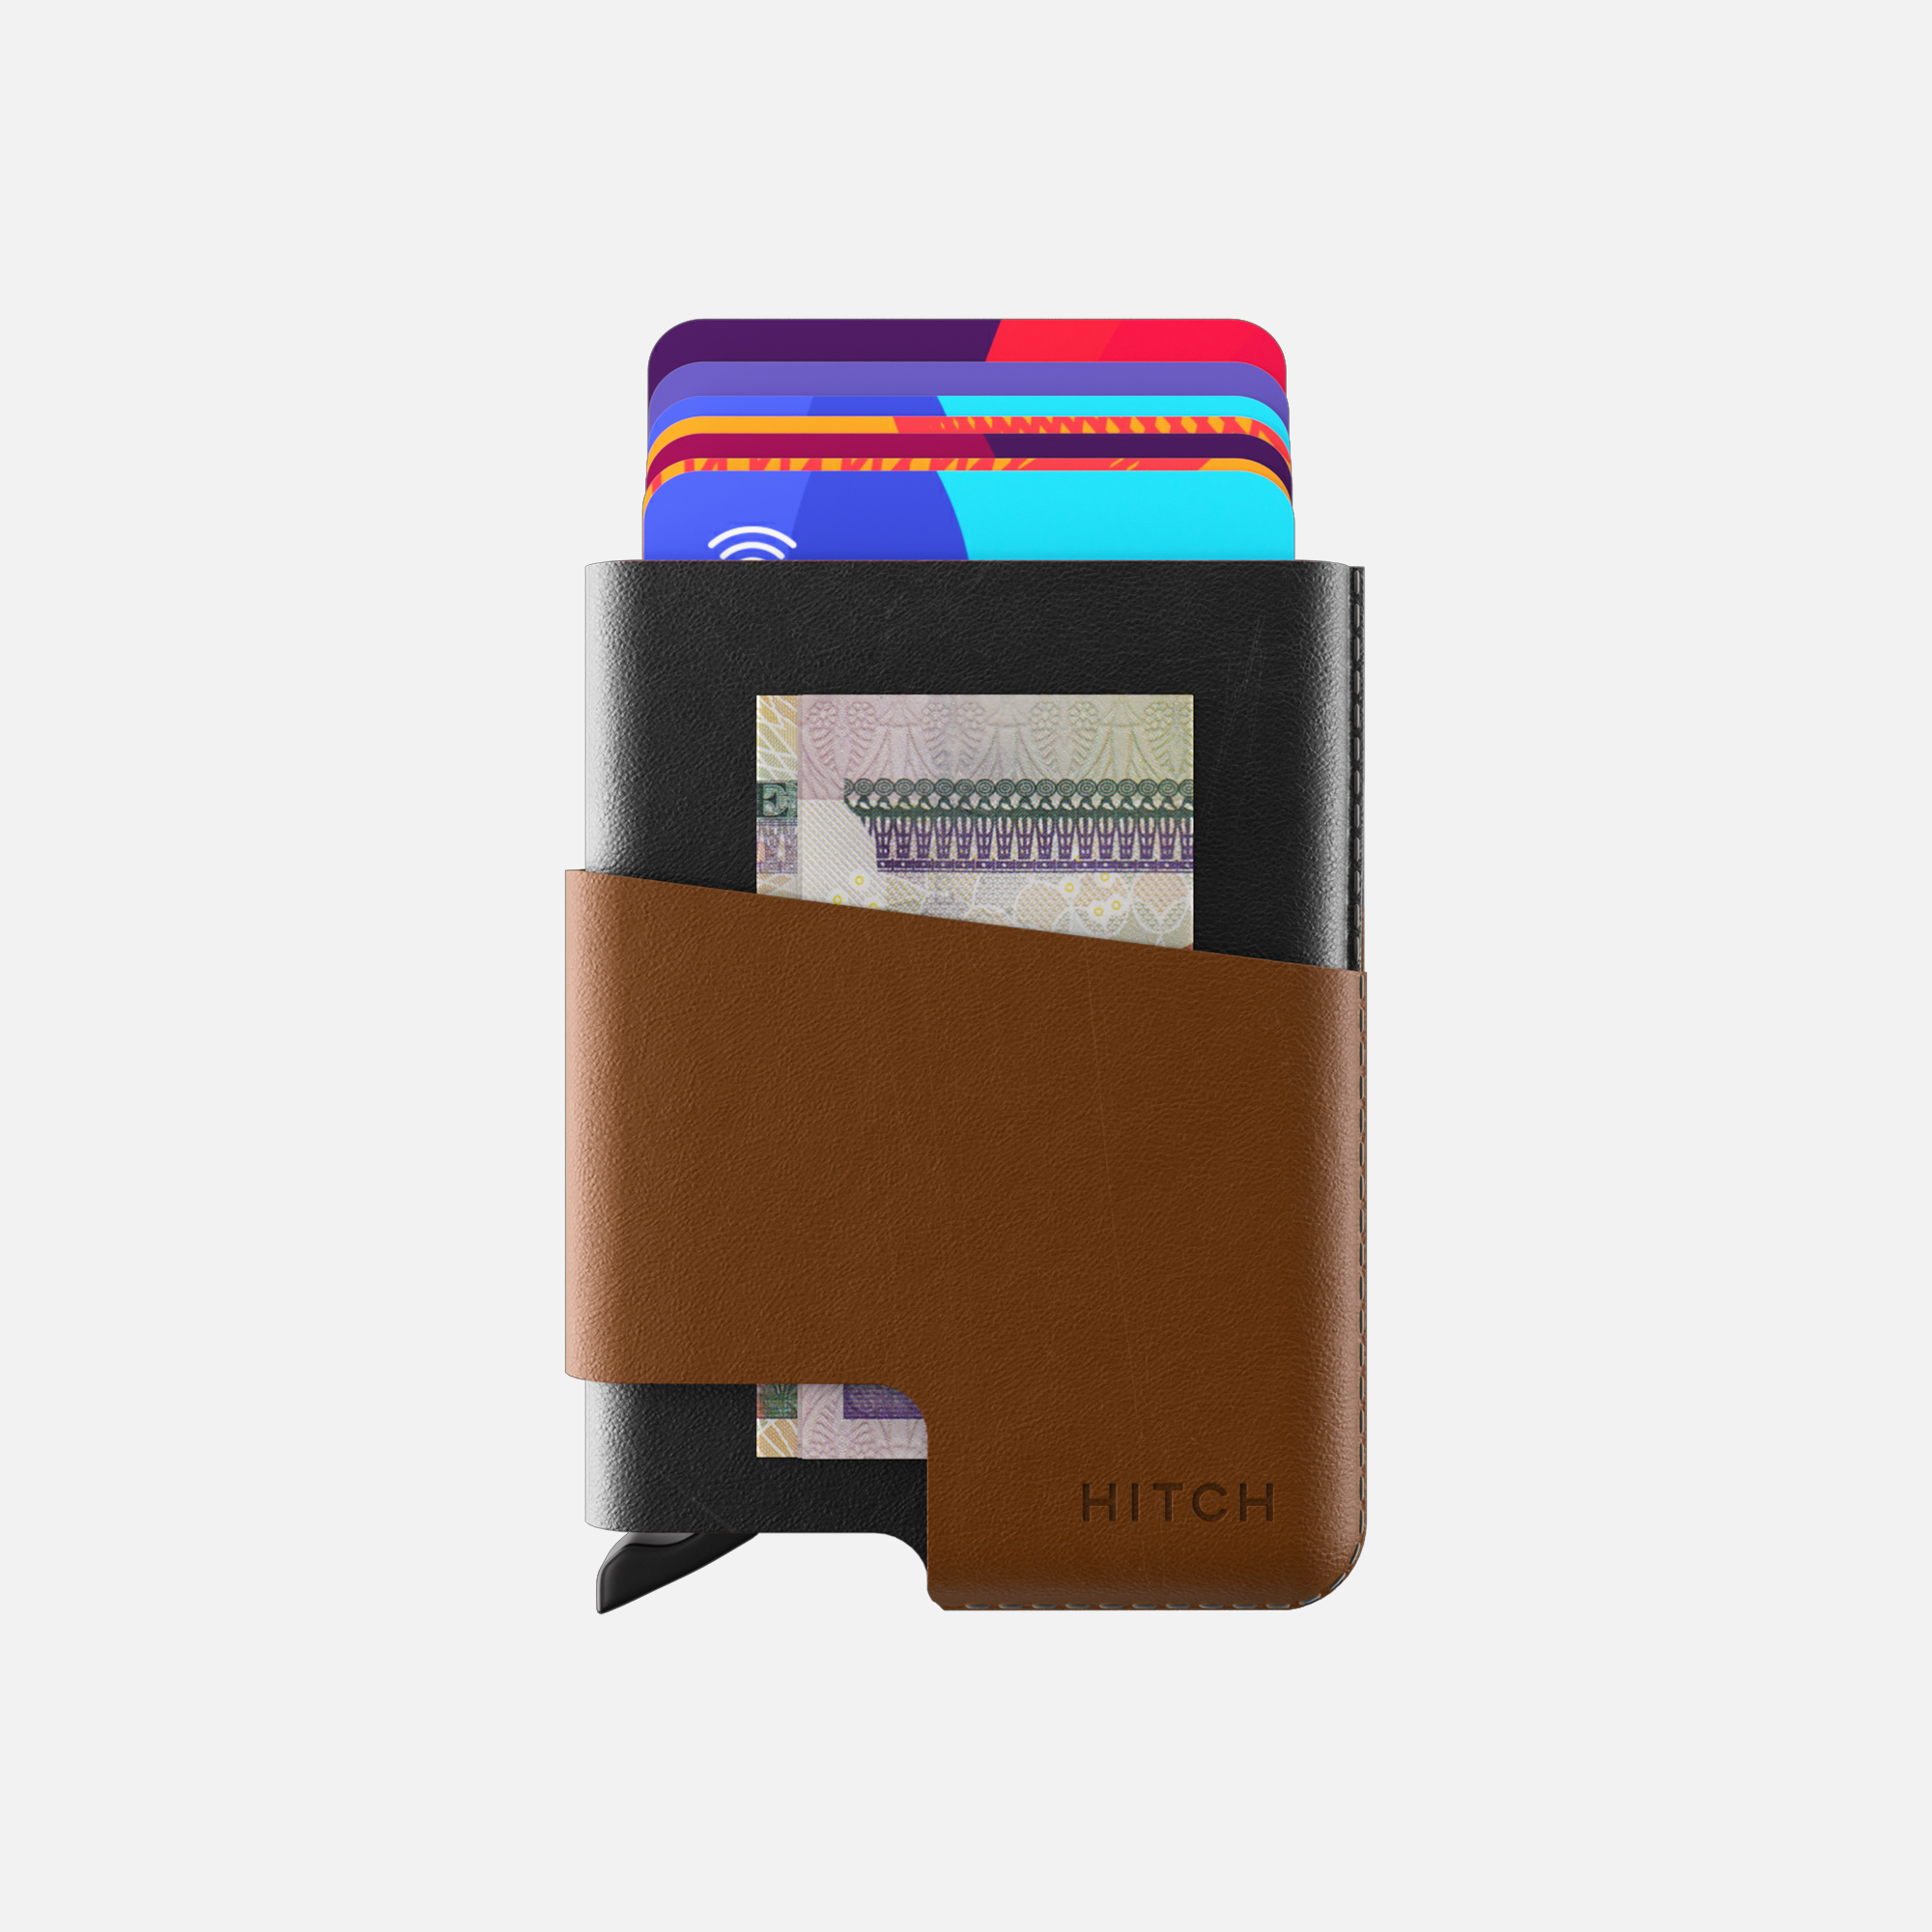 Cut-out cardholder offer | Together you can save more